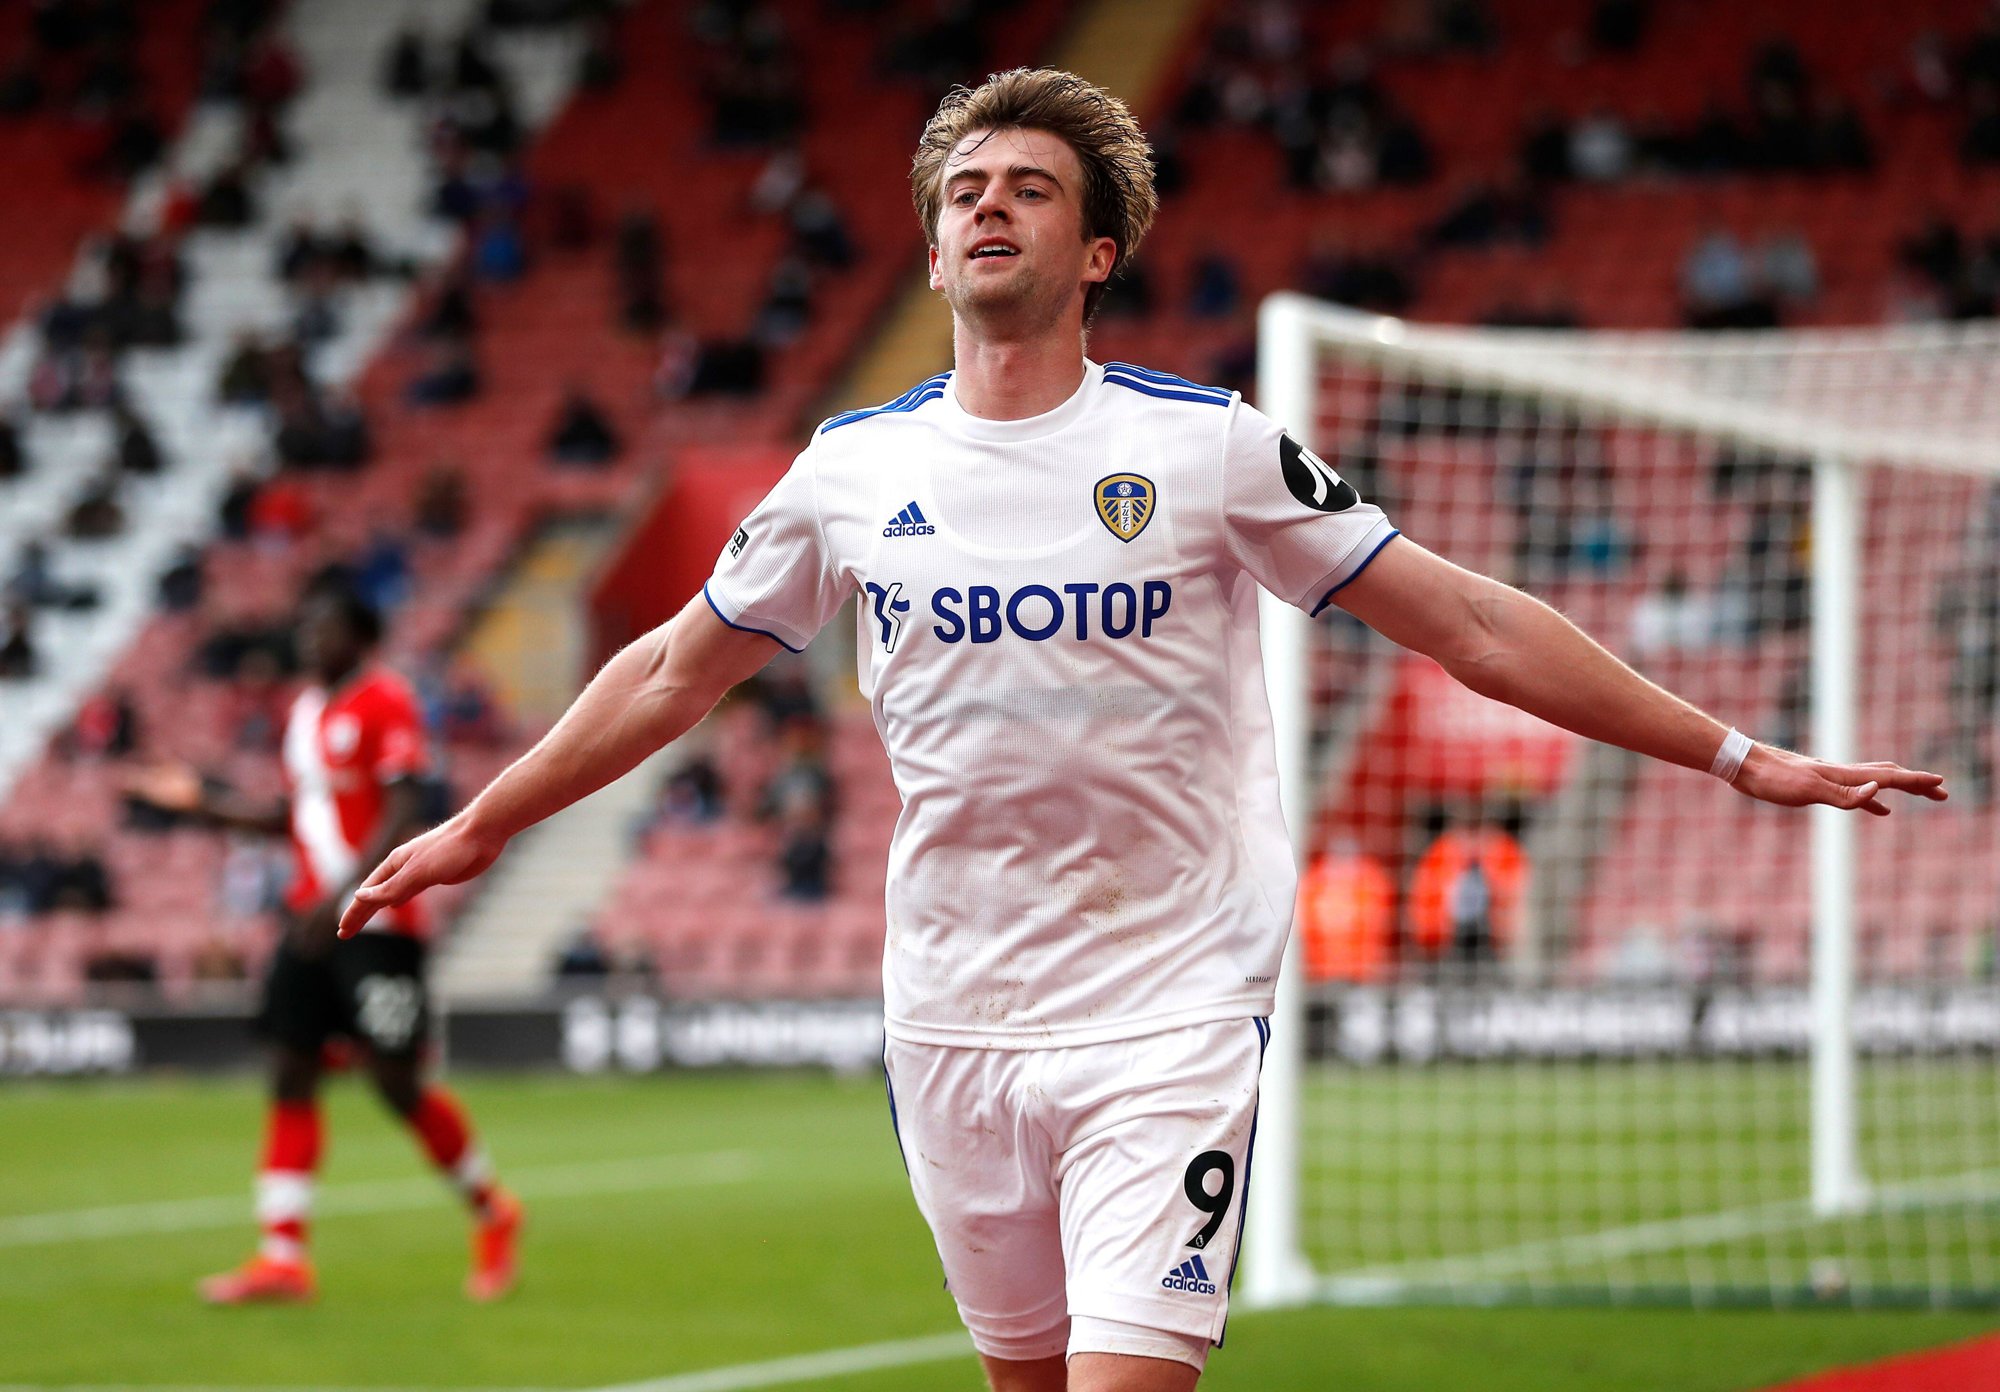 Patrick Bamford Abuse Is Just The Latest Stain On The So-Called Beautiful Game